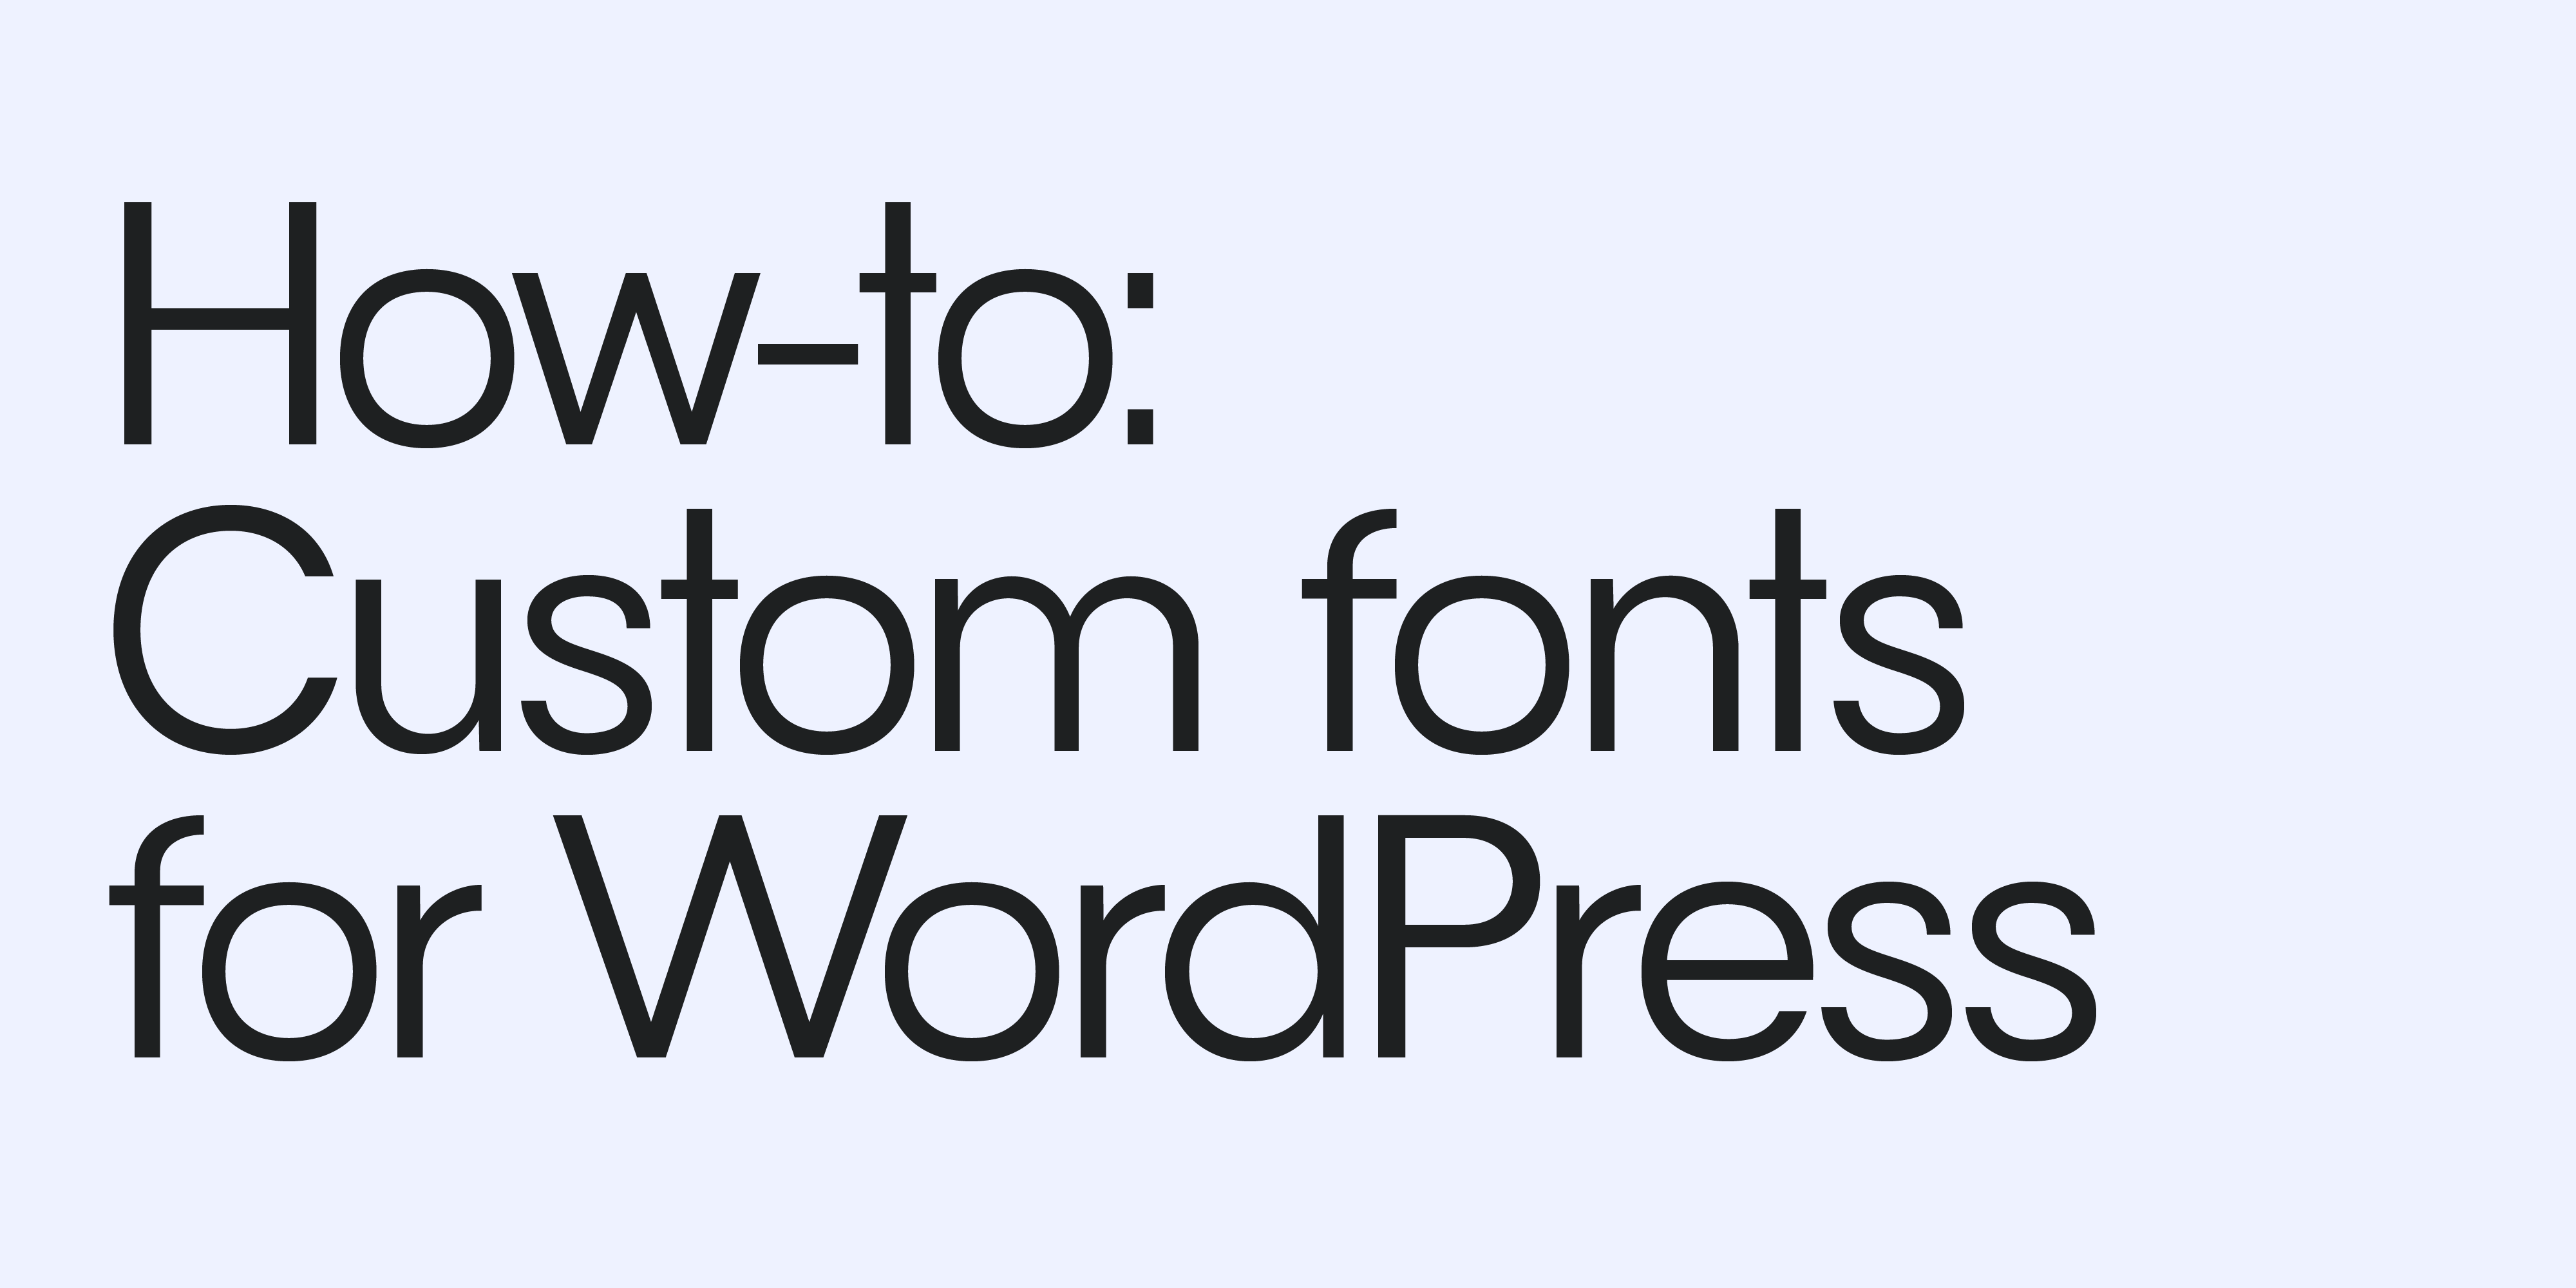 How to install custom fonts in Wordpress